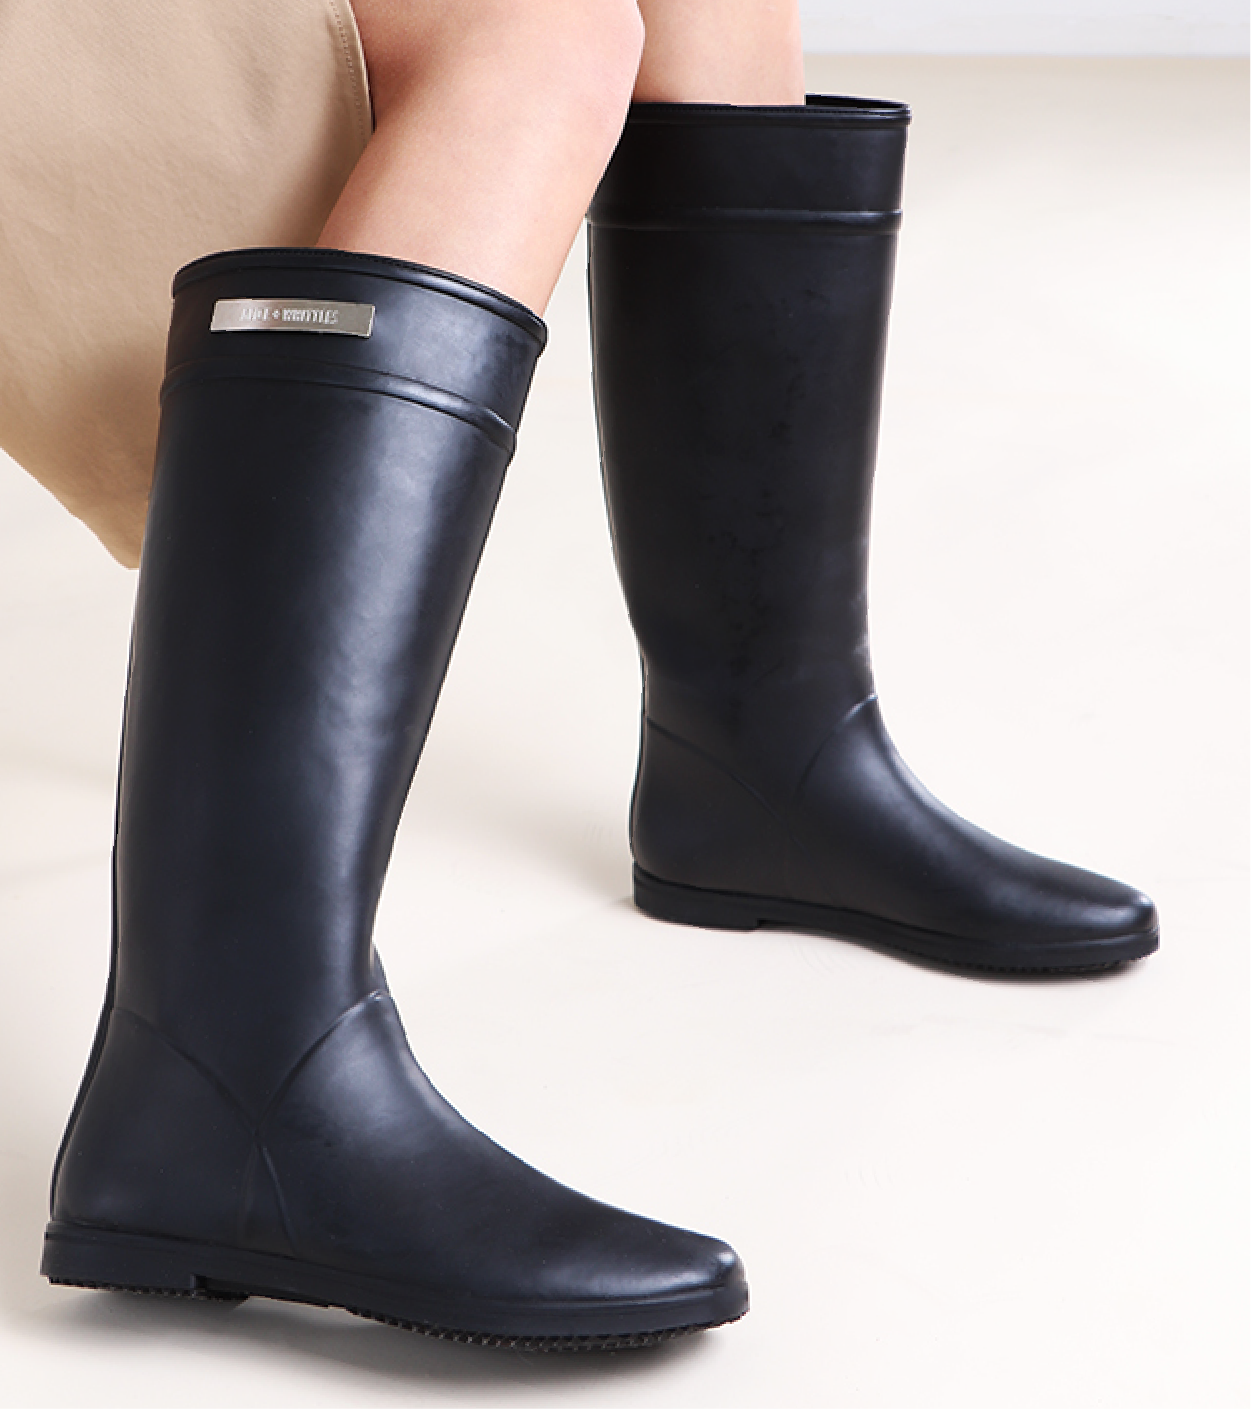 Tall rainboots from Alice + Whittles